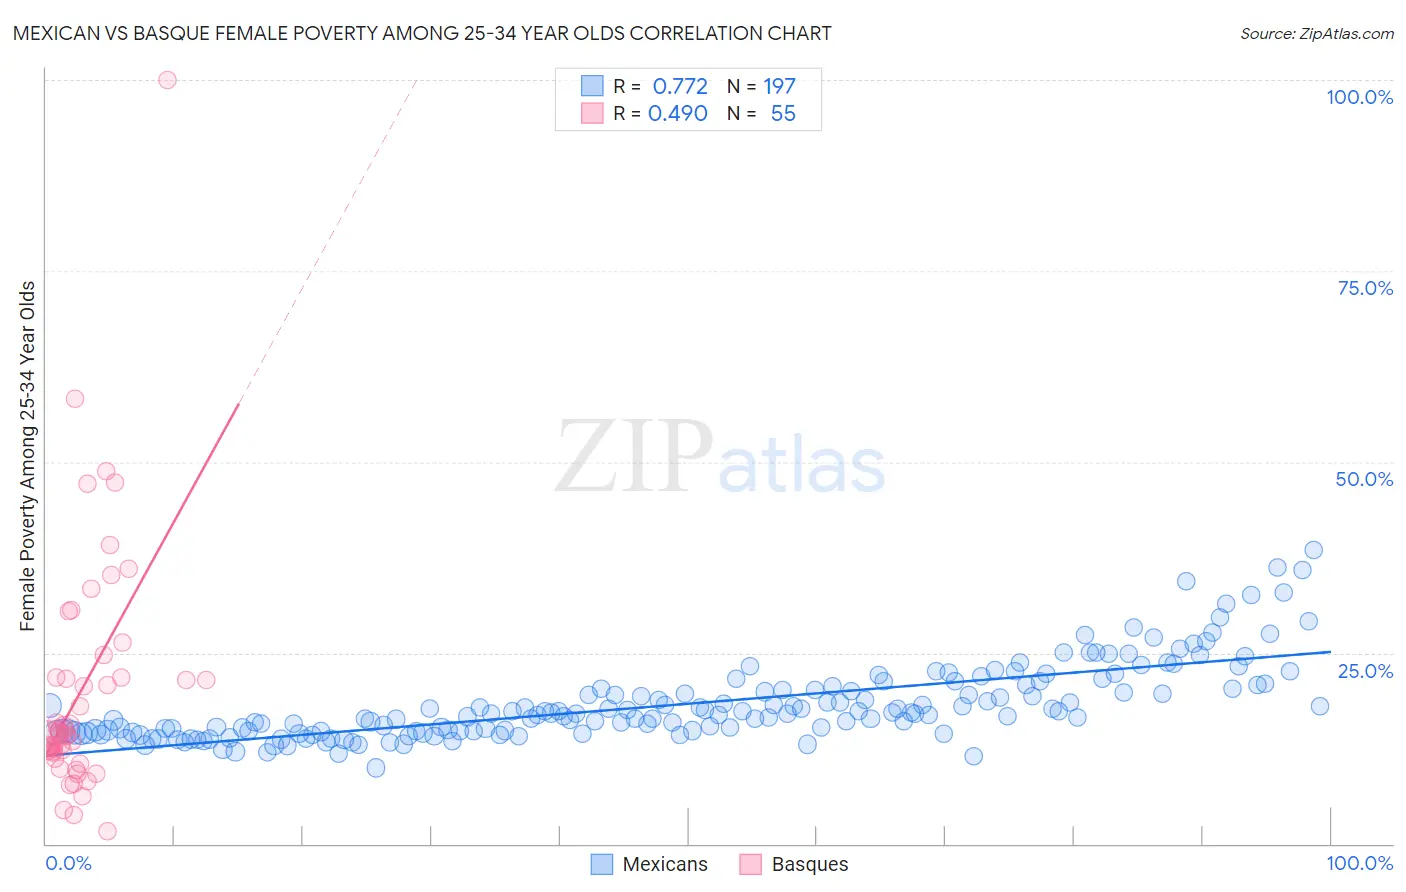 Mexican vs Basque Female Poverty Among 25-34 Year Olds